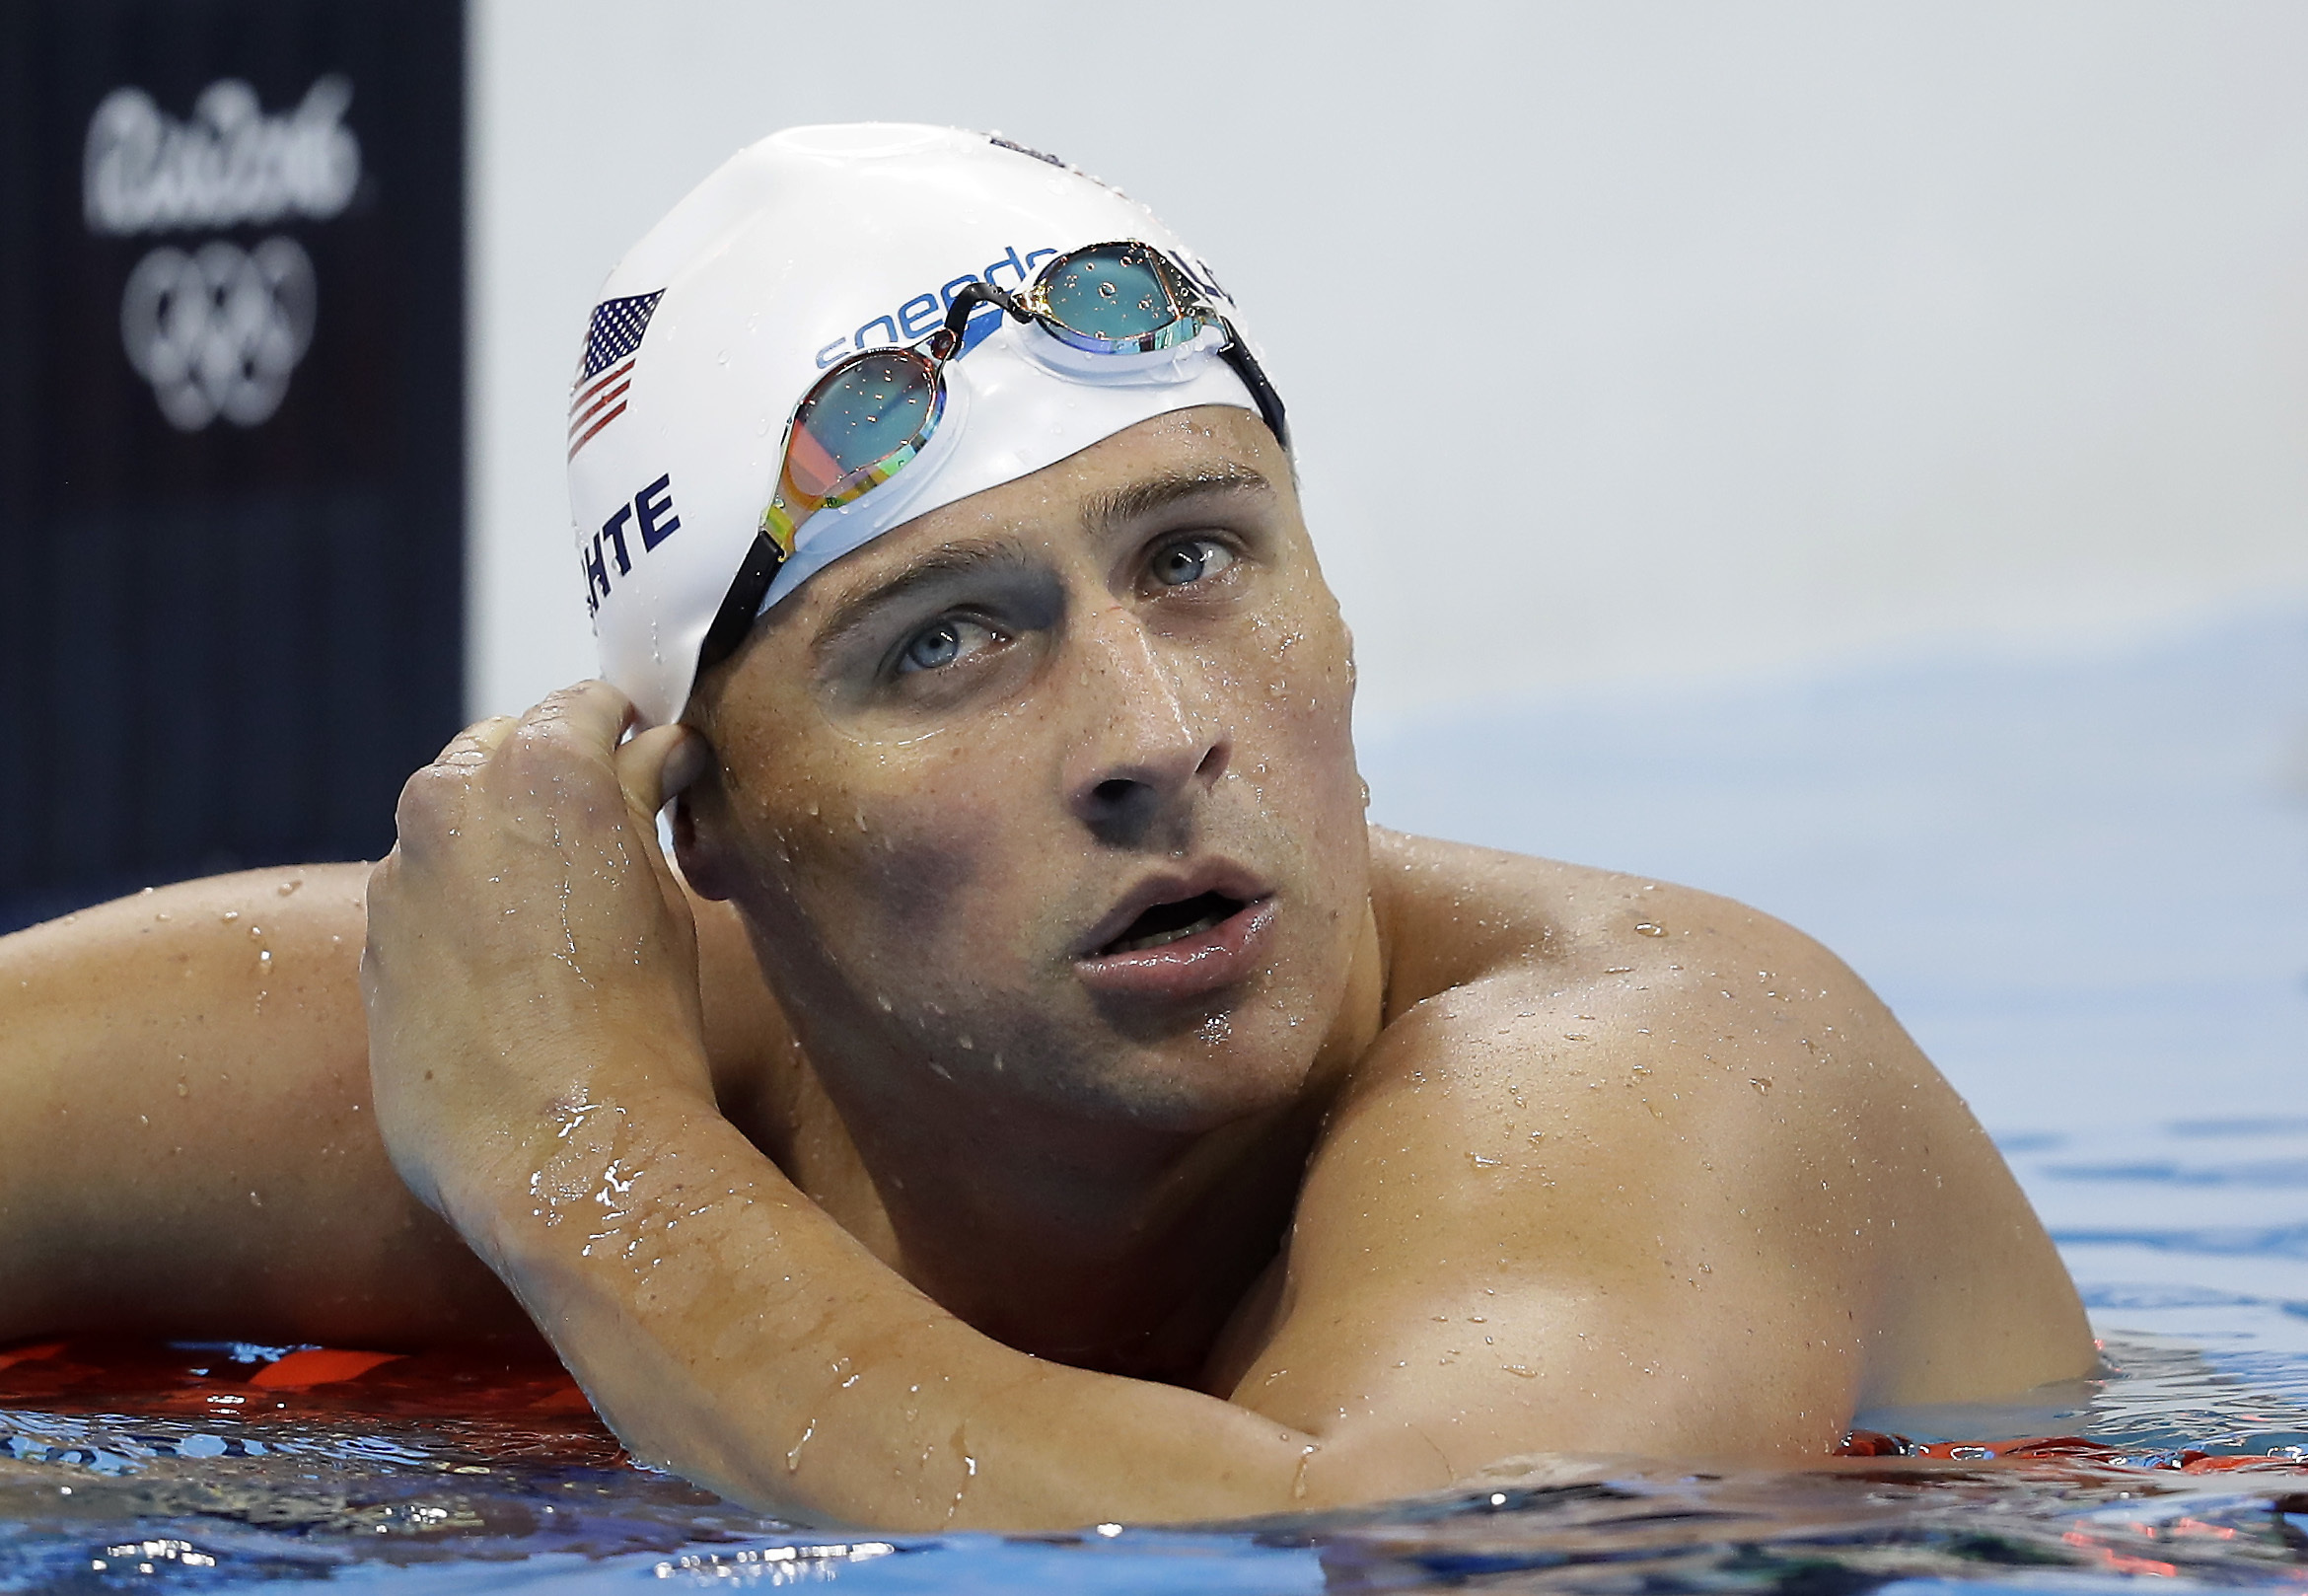 United States' Ryan Lochte checks his time in a men's 4x200-meter freestyle heat during the swimming competitions at the 2016 Summer Olympics, in Rio de Janeiro, Brazil. Lochte and three other American swimmers were robbed at gunpoint early Sunday, Aug. 14, by thieves posing as police officers who stopped their taxi and took their money and belongings, the U.S. Olympic Committee said.